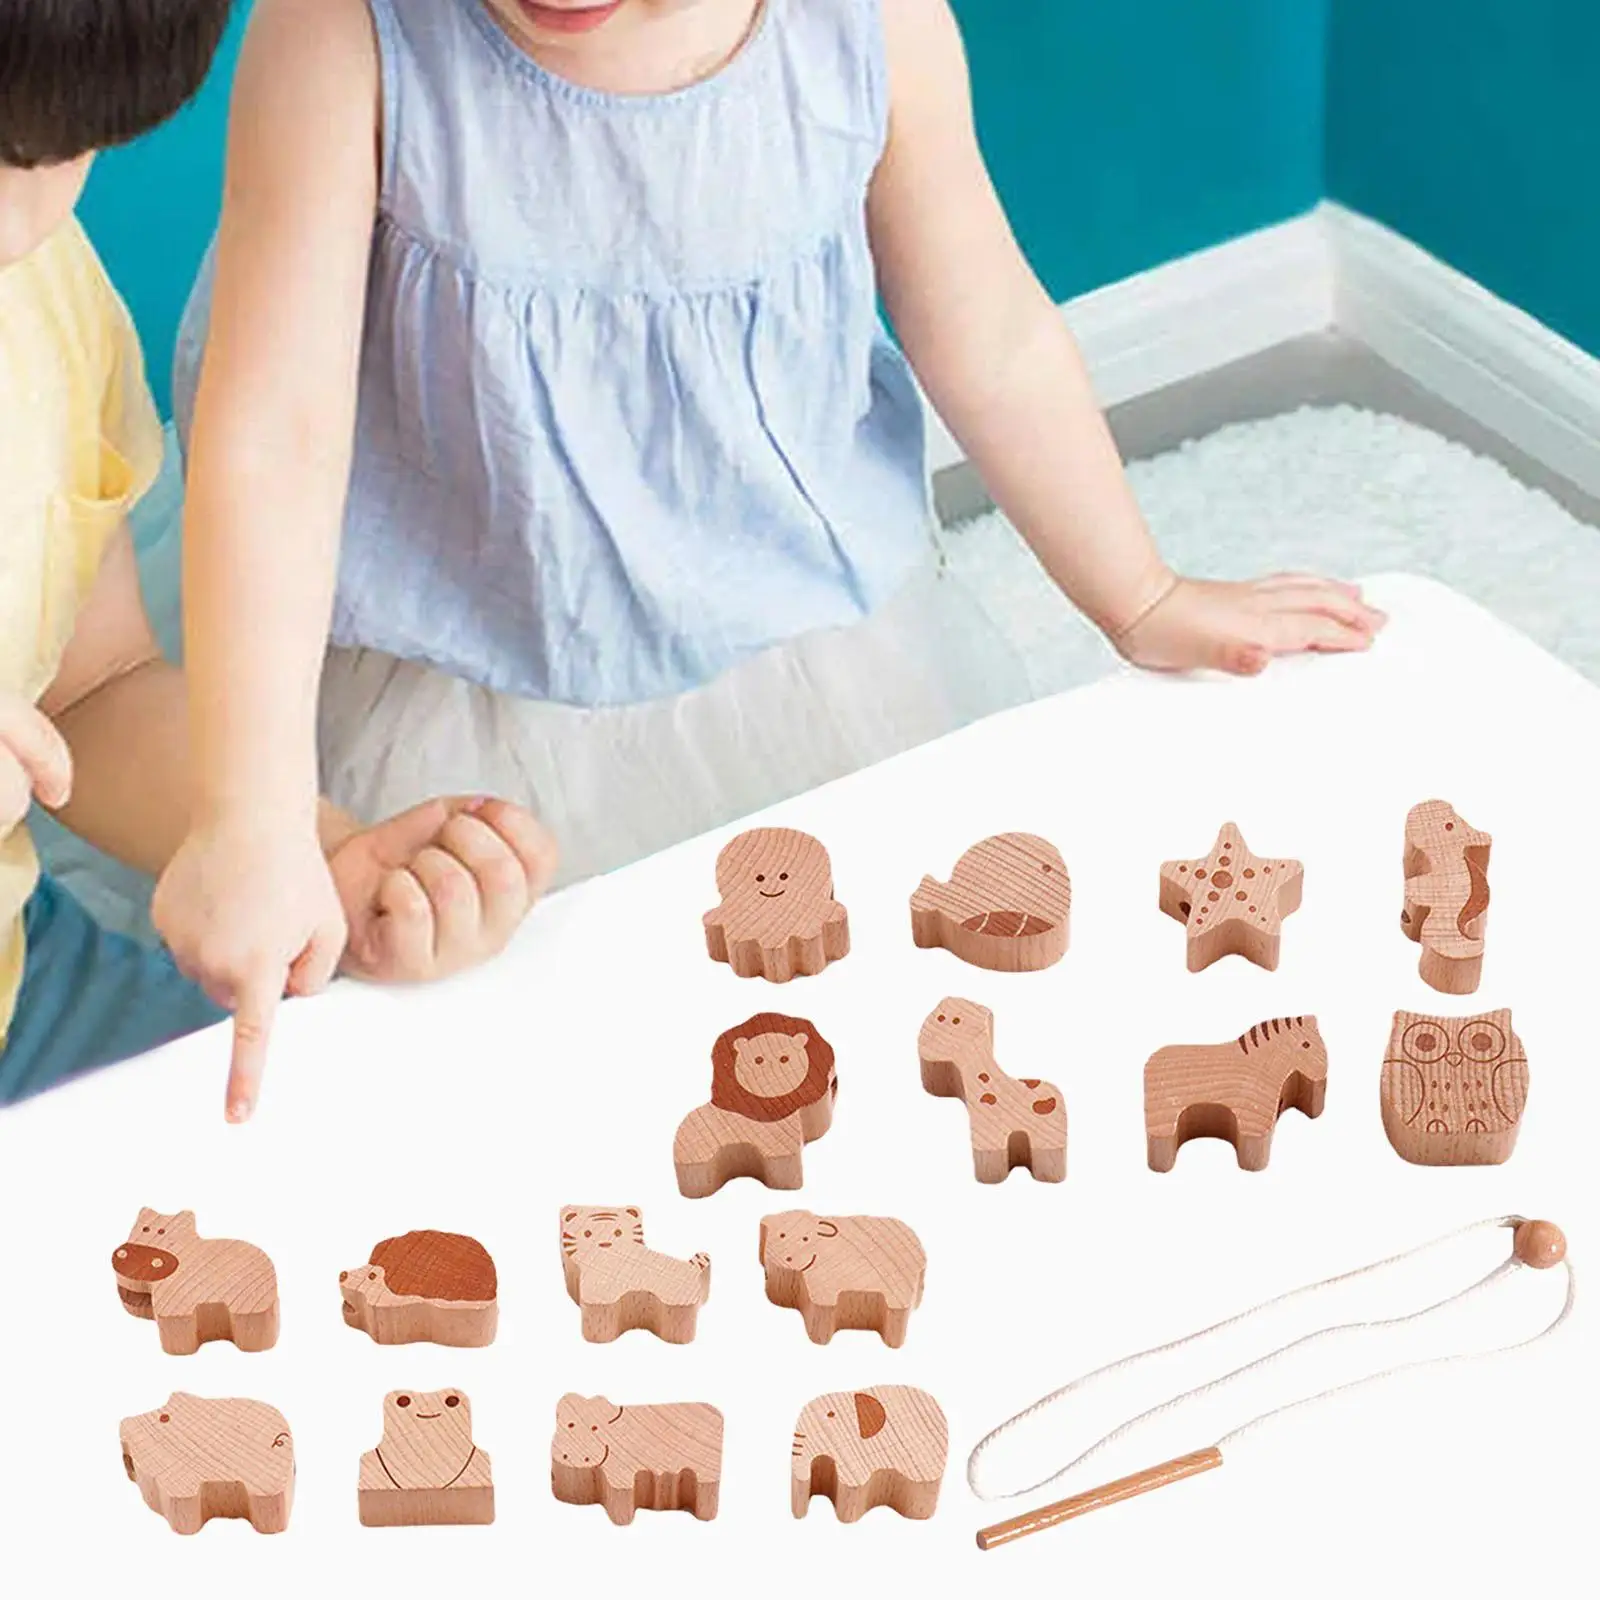 Wooden Lacing Beads Toys Early Educational Toy for Children Holiday Gifts